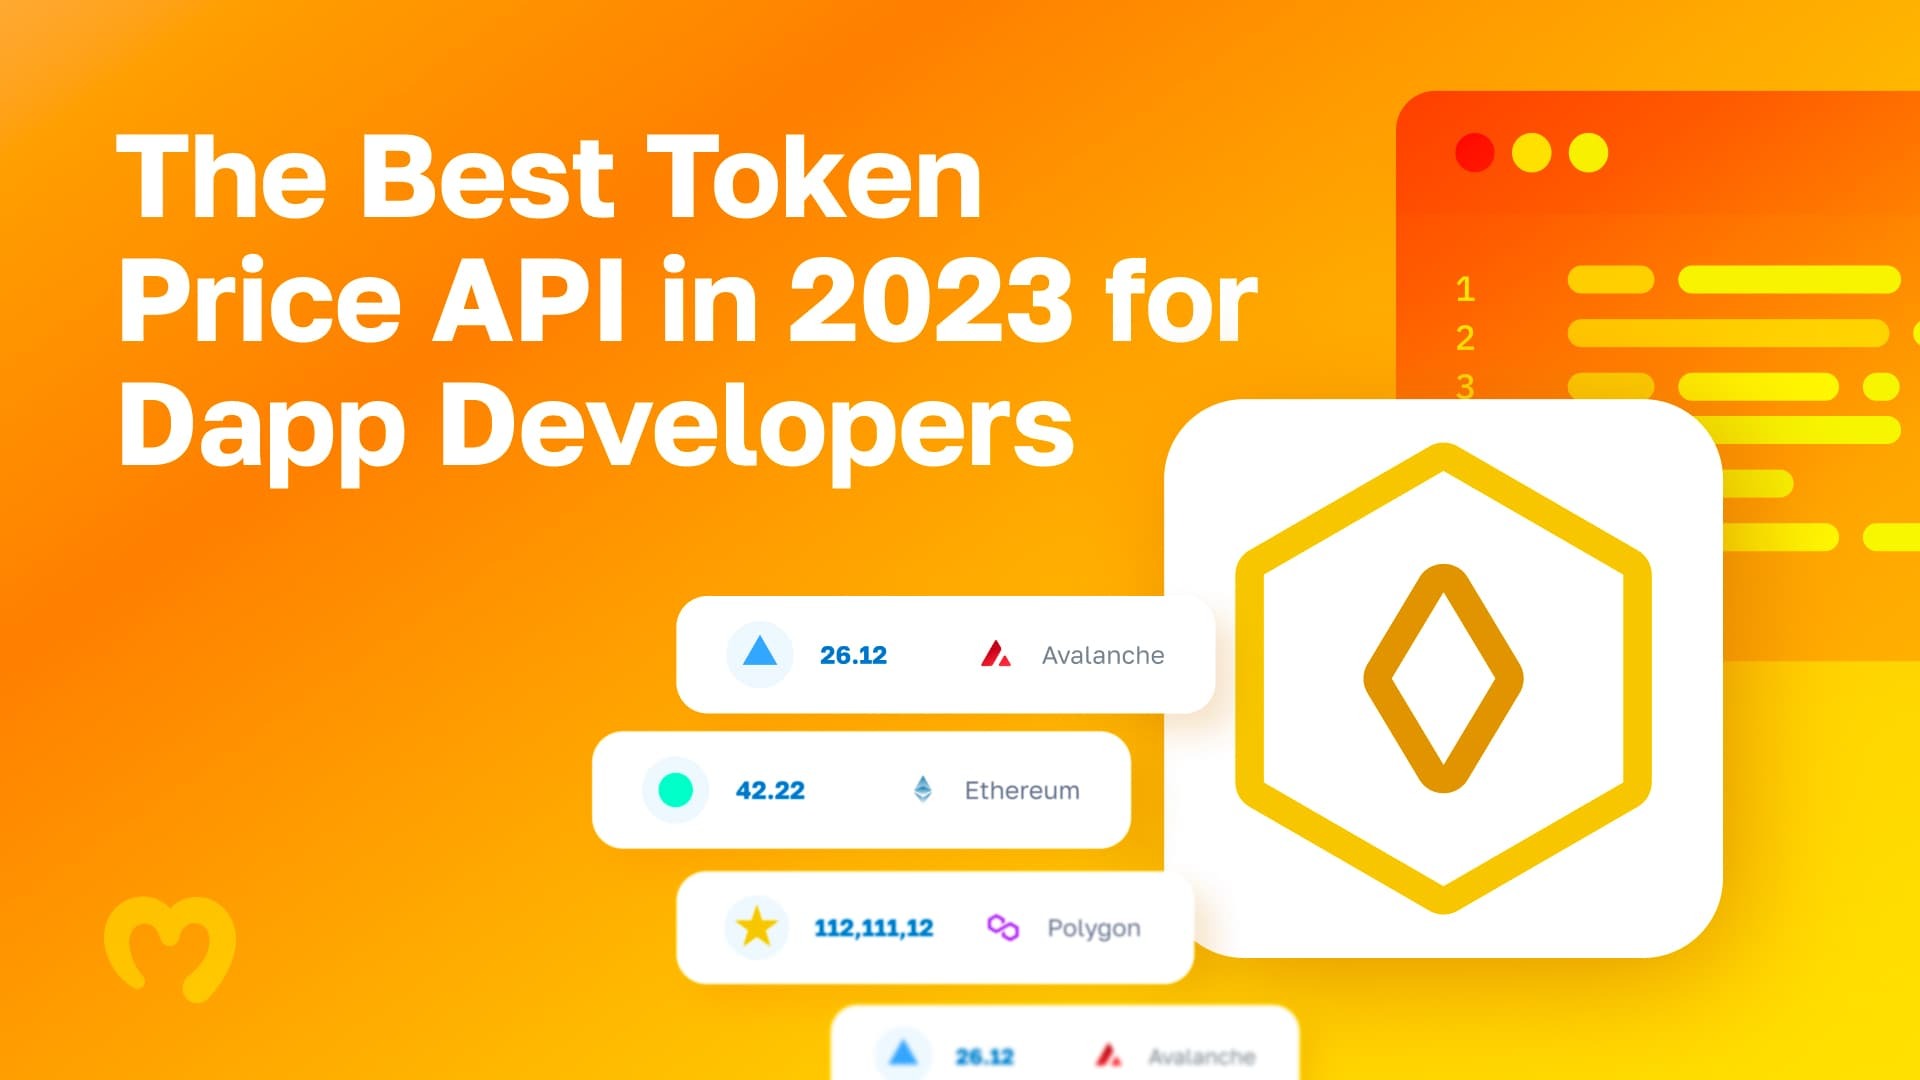 Introducing the Best Token Price API in 2023 for Dapp Developers